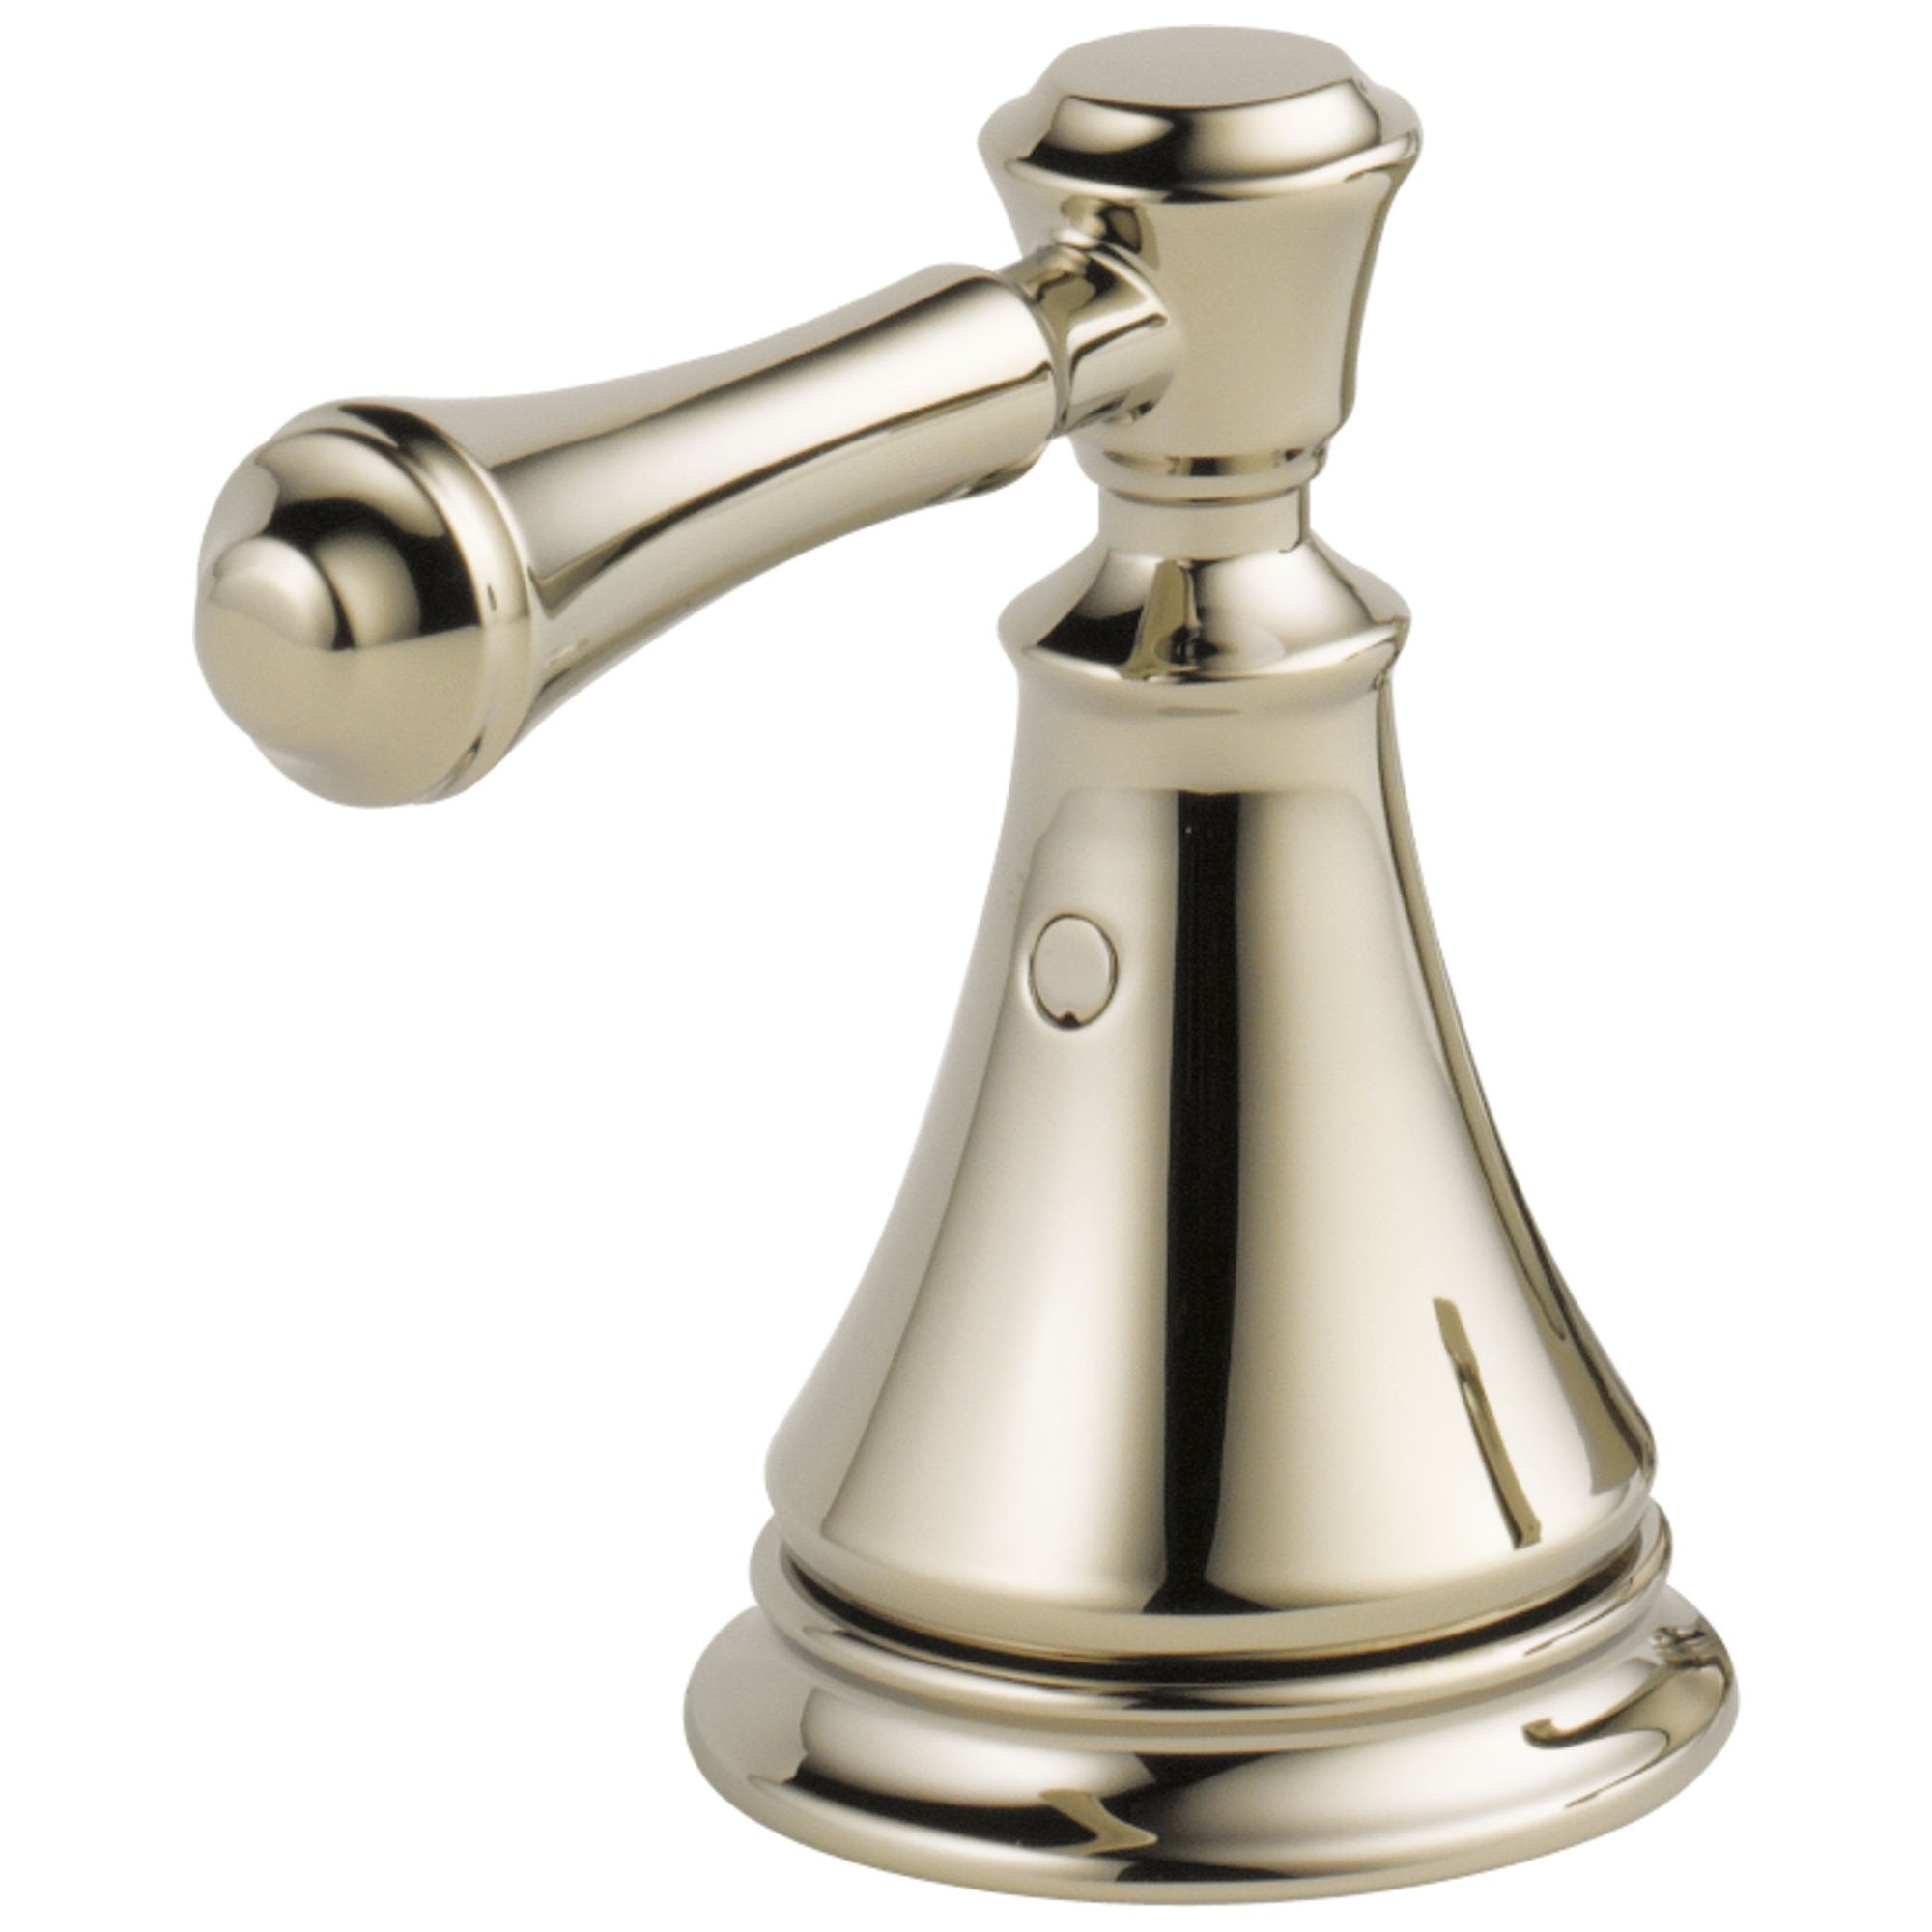 Delta Cassidy Collection Polished Nickel Finish Lavatory Lever Handles - Quantity 2 Included 579612